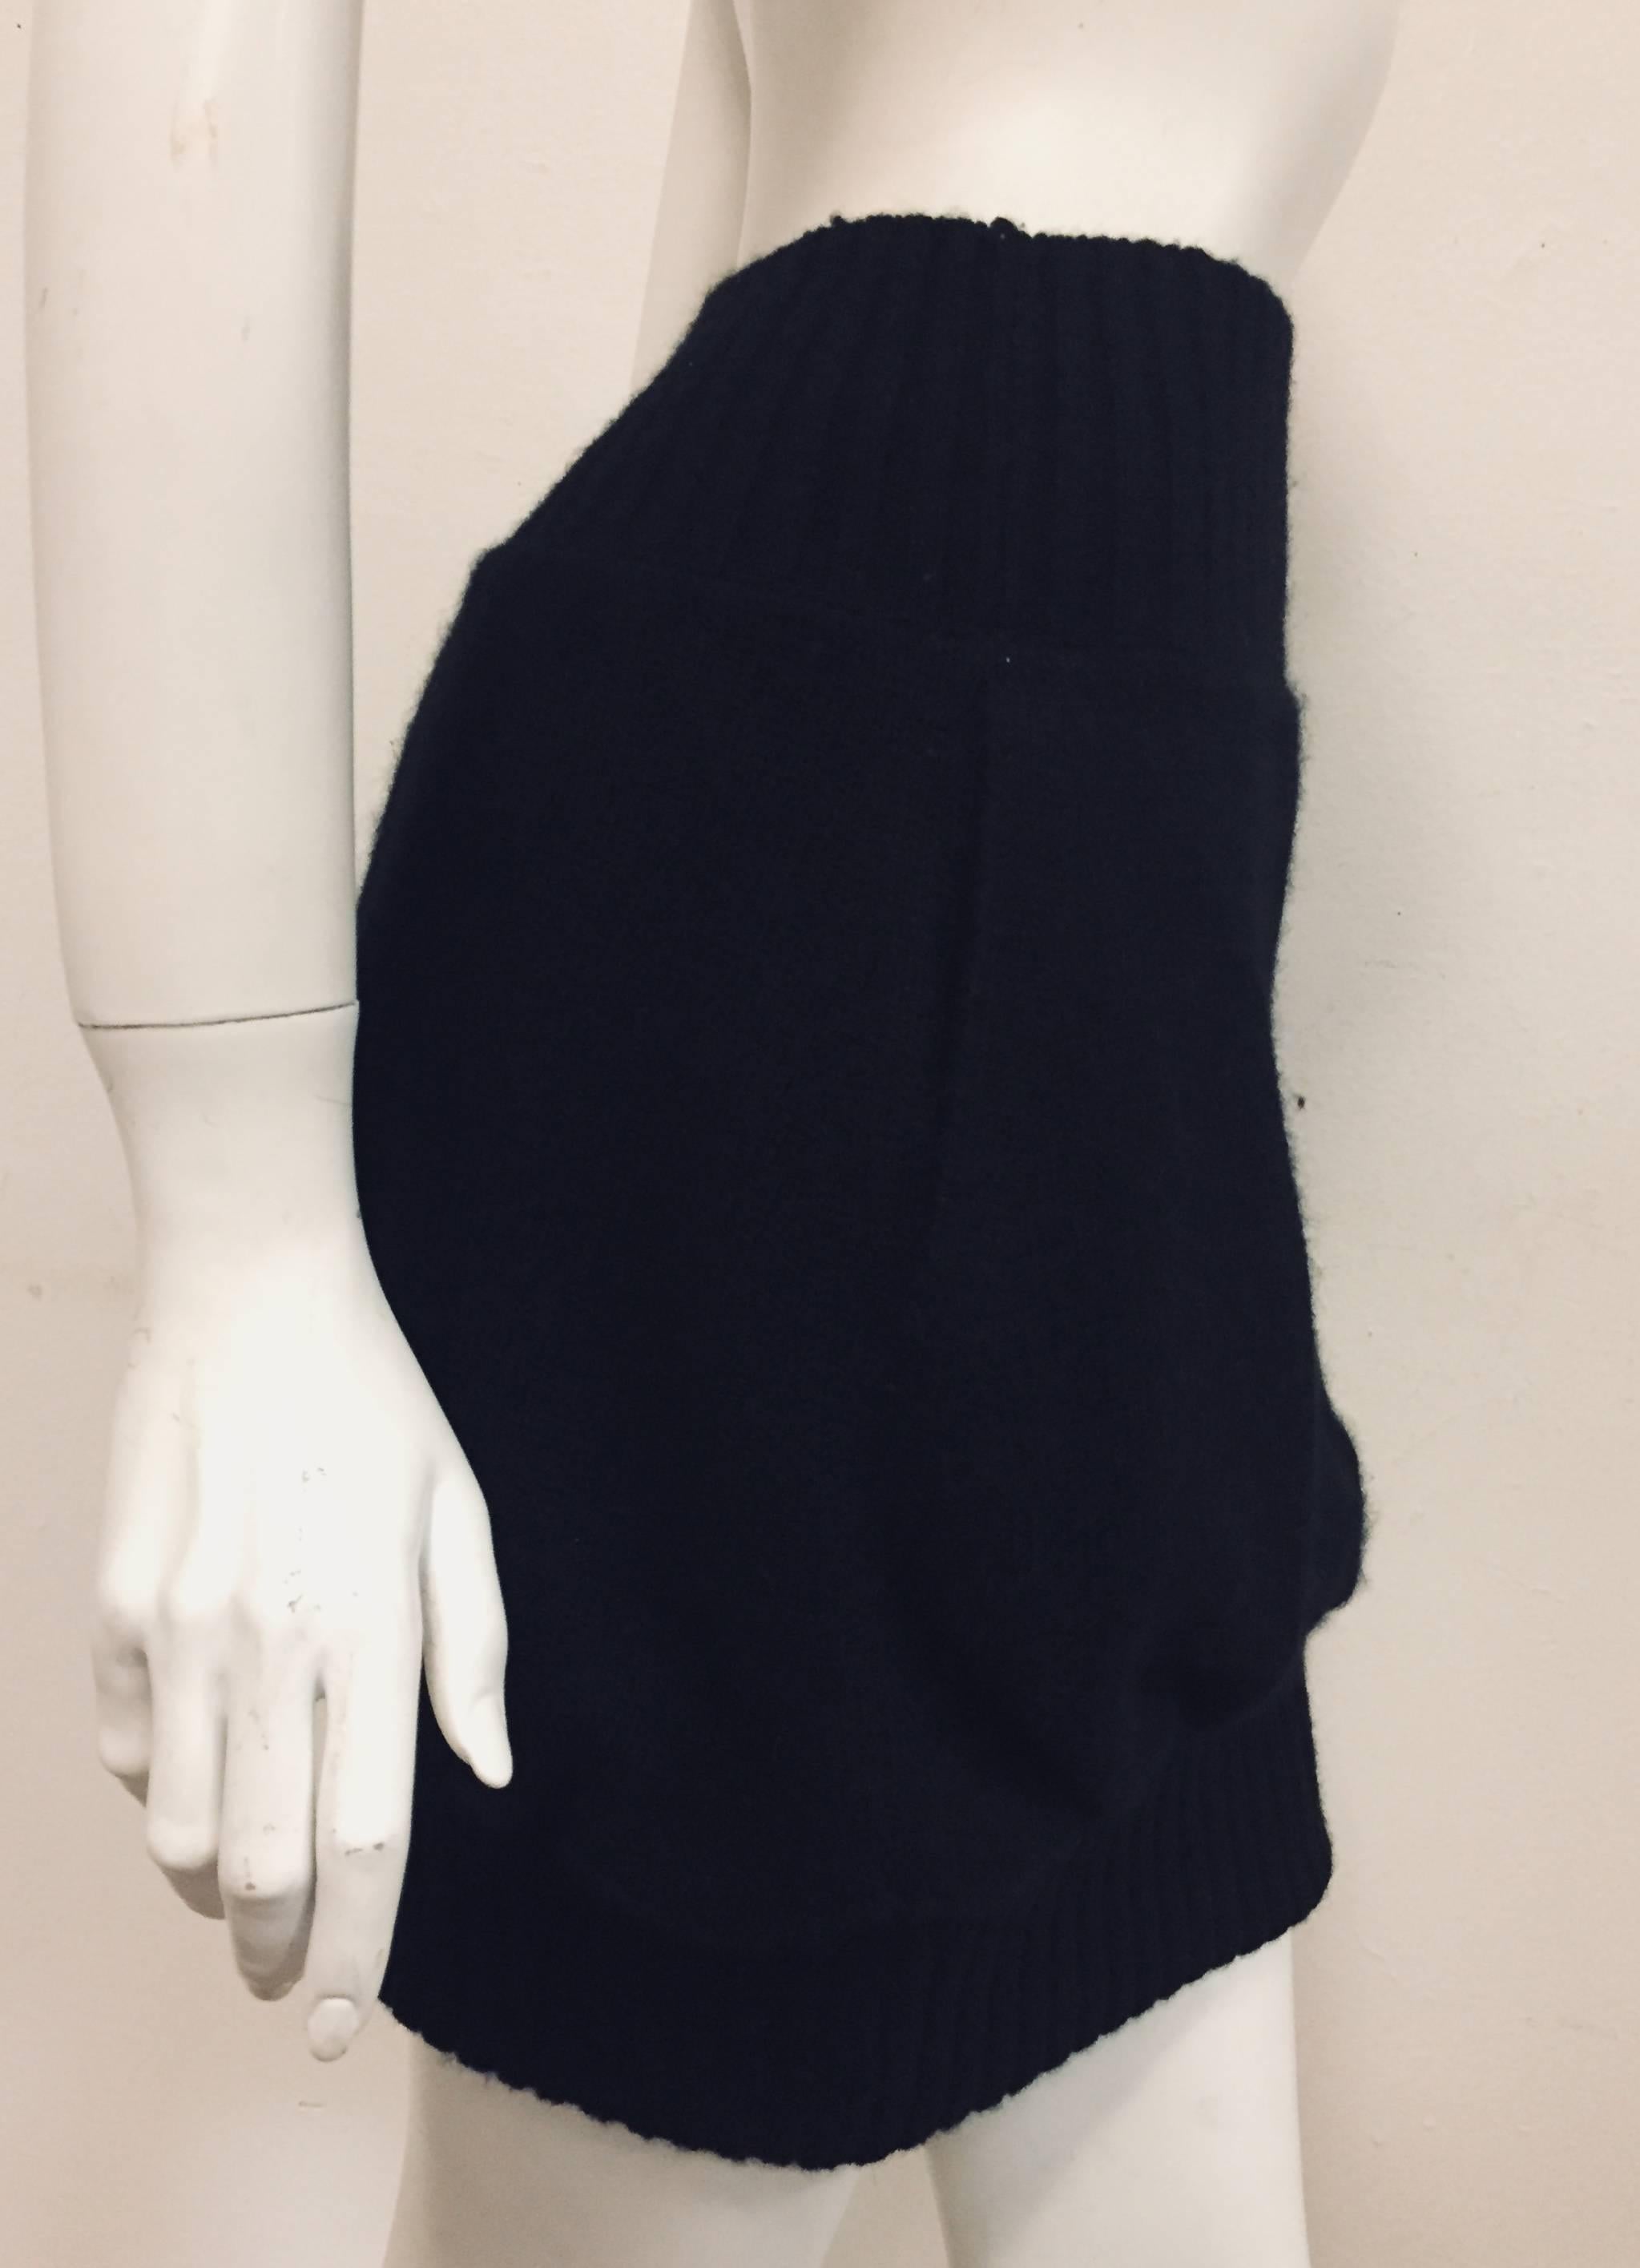 Chanel black Bubble sweater like skirt is ribbed at the waist and also at the hem giving it a bubble (round) effect.   This black cashmere knit skirt can worn with any style top and basically any color.  The skirt is not lined at the waist nor hem